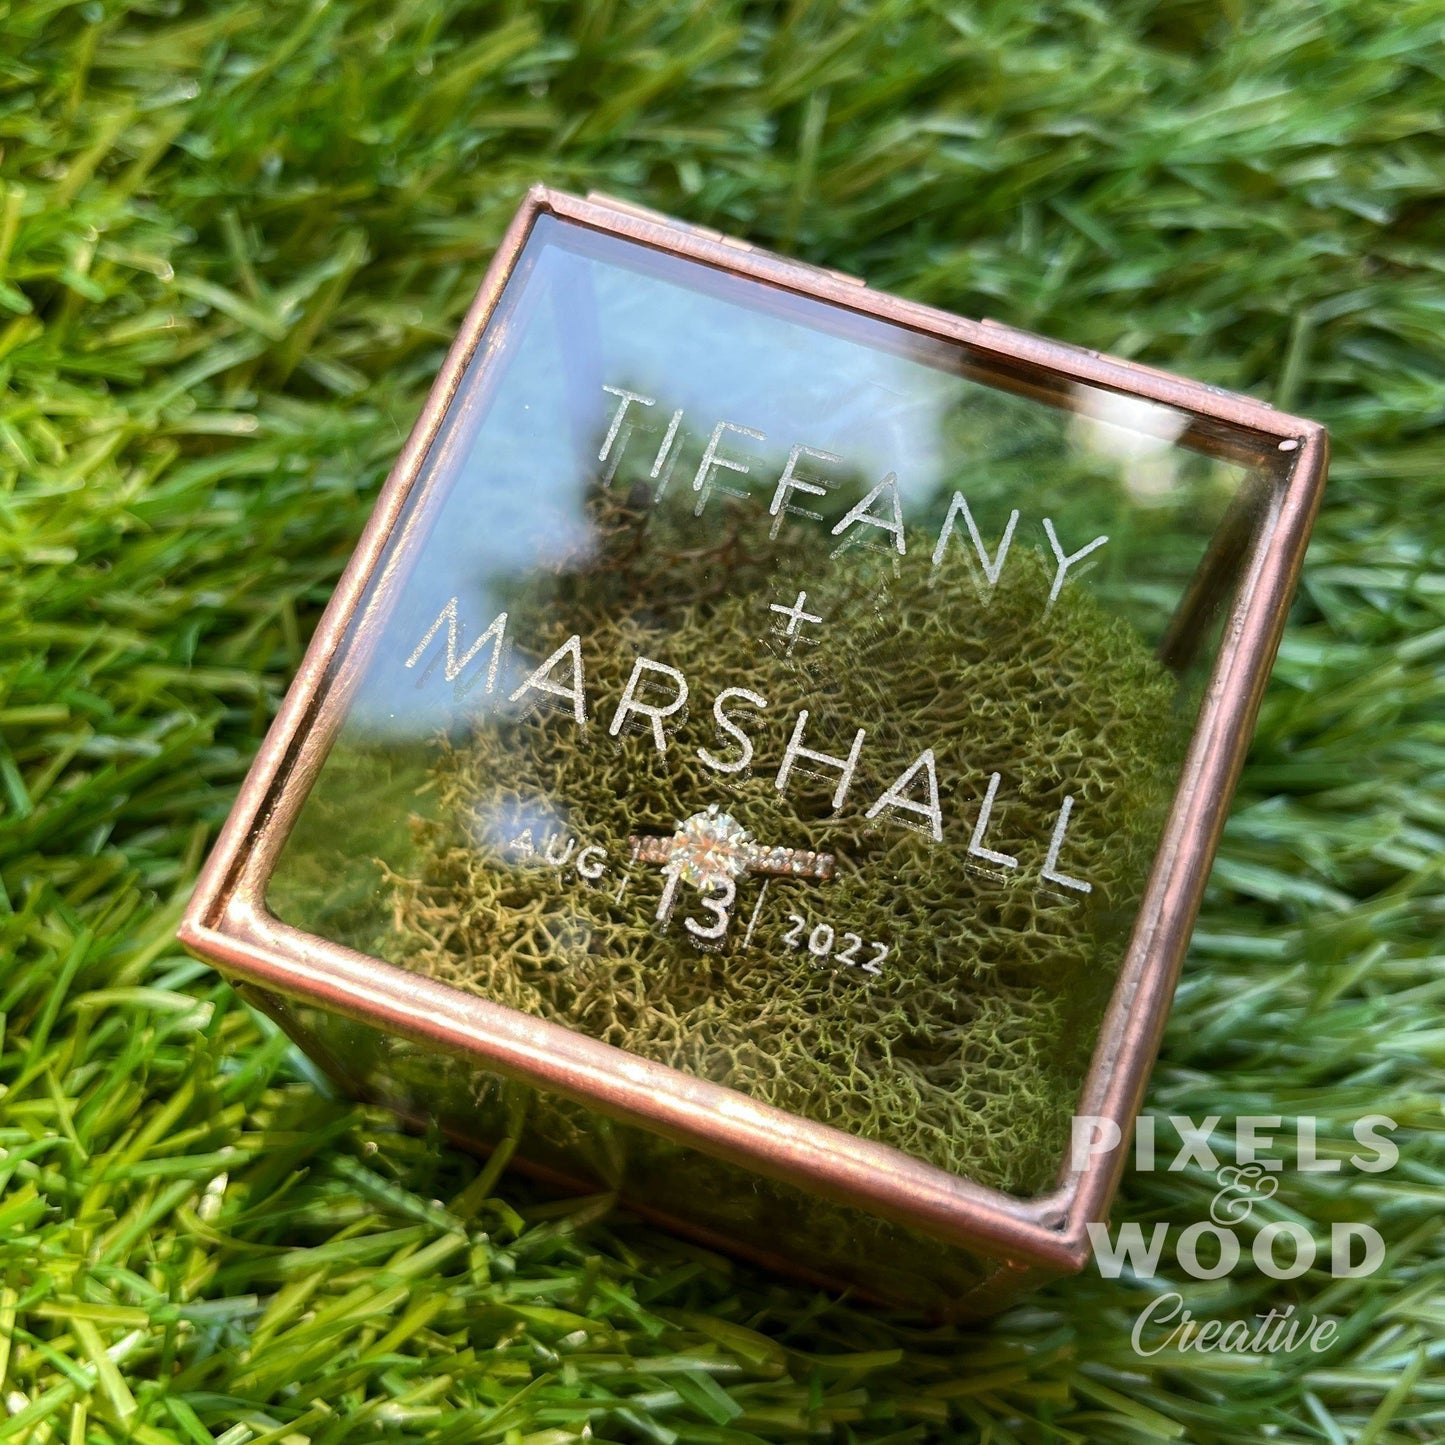 Engraved Glass Ring Box